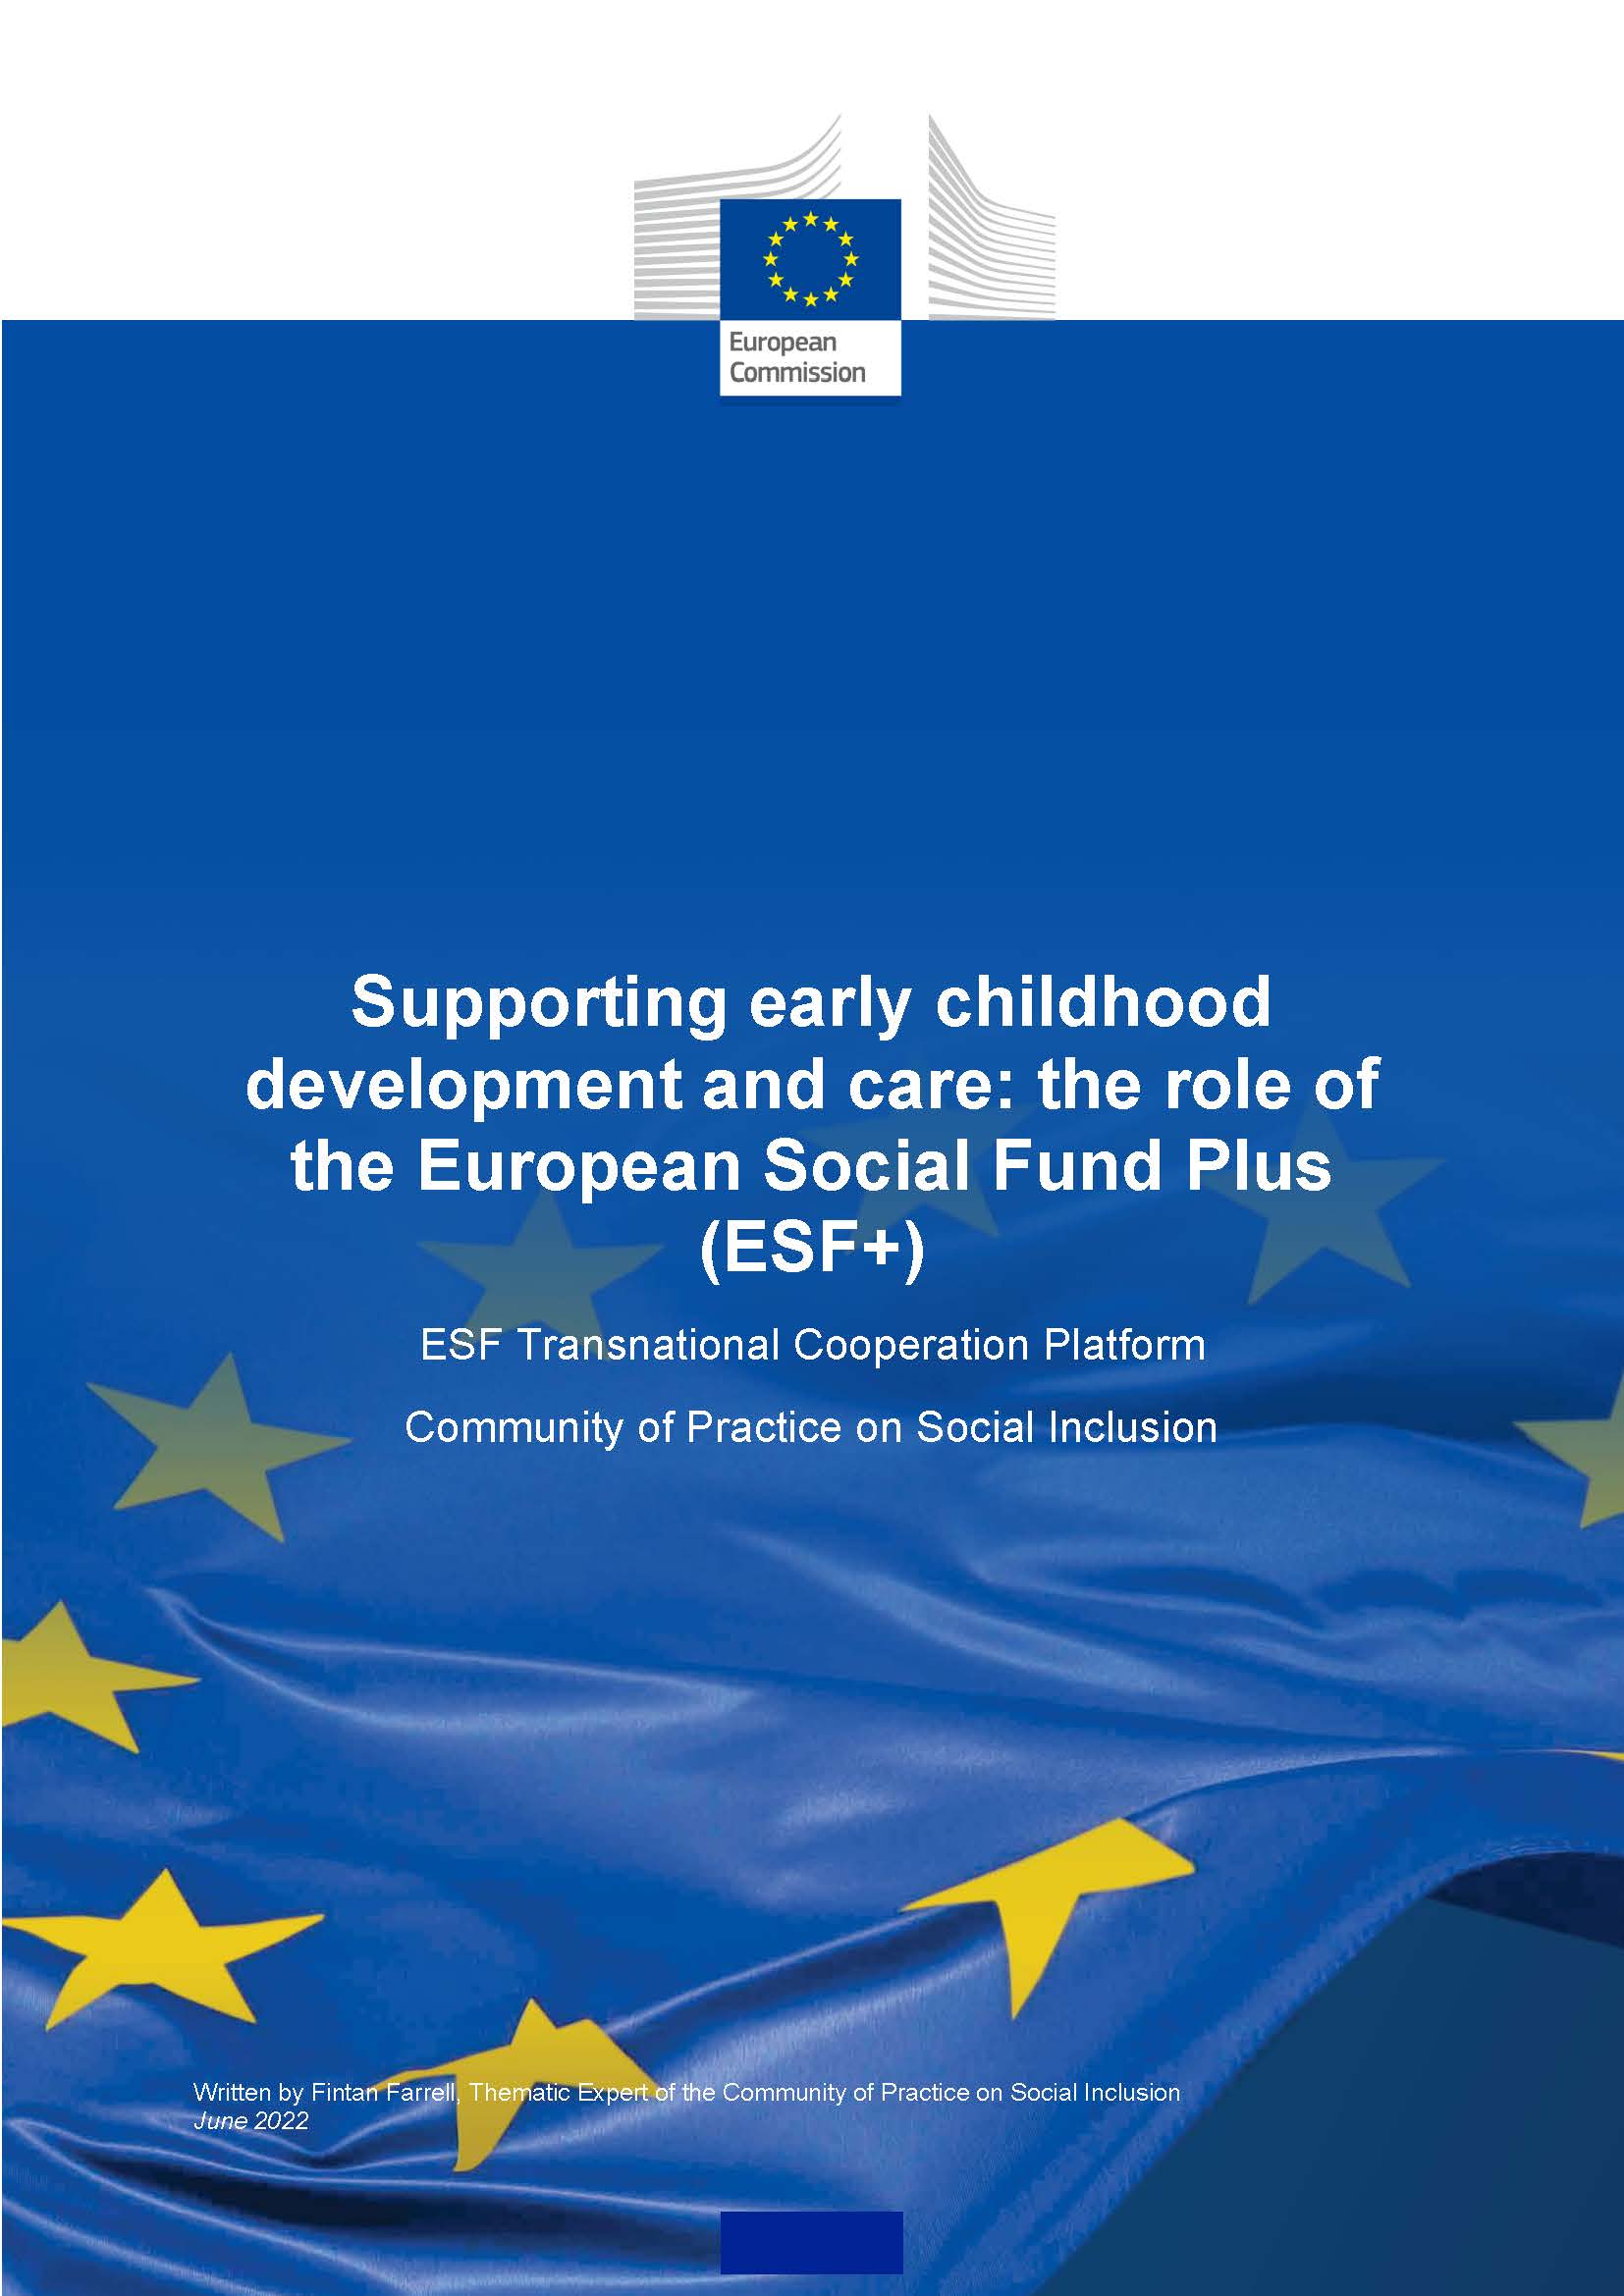 Supporting early childhood development and care: the role of the European Social Fund Plus (ESF+)